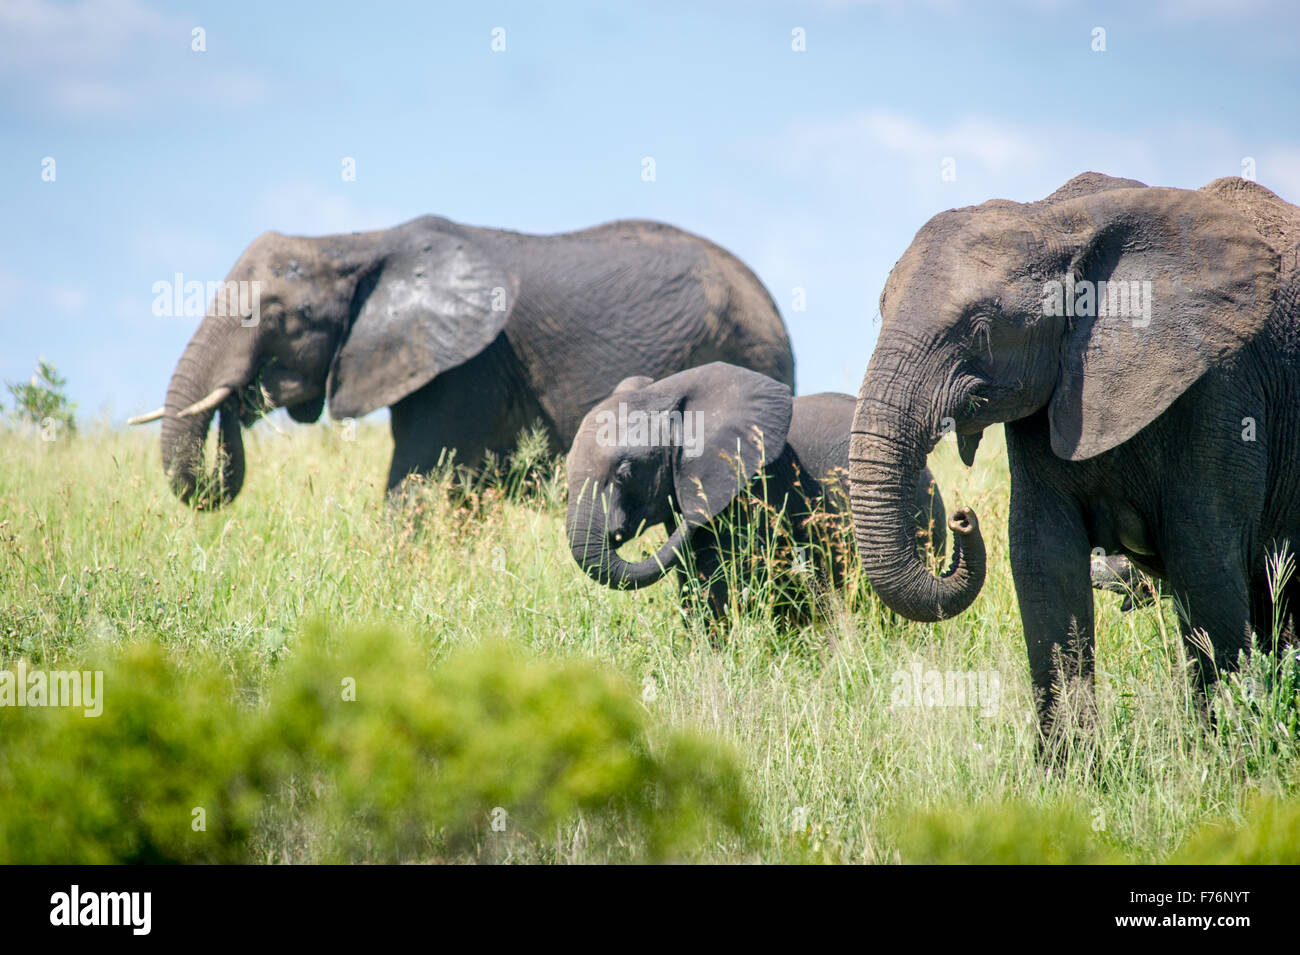 Sud Africa - Parco Nazionale Kruger dell' elefante africano (Loxodonta) Foto Stock